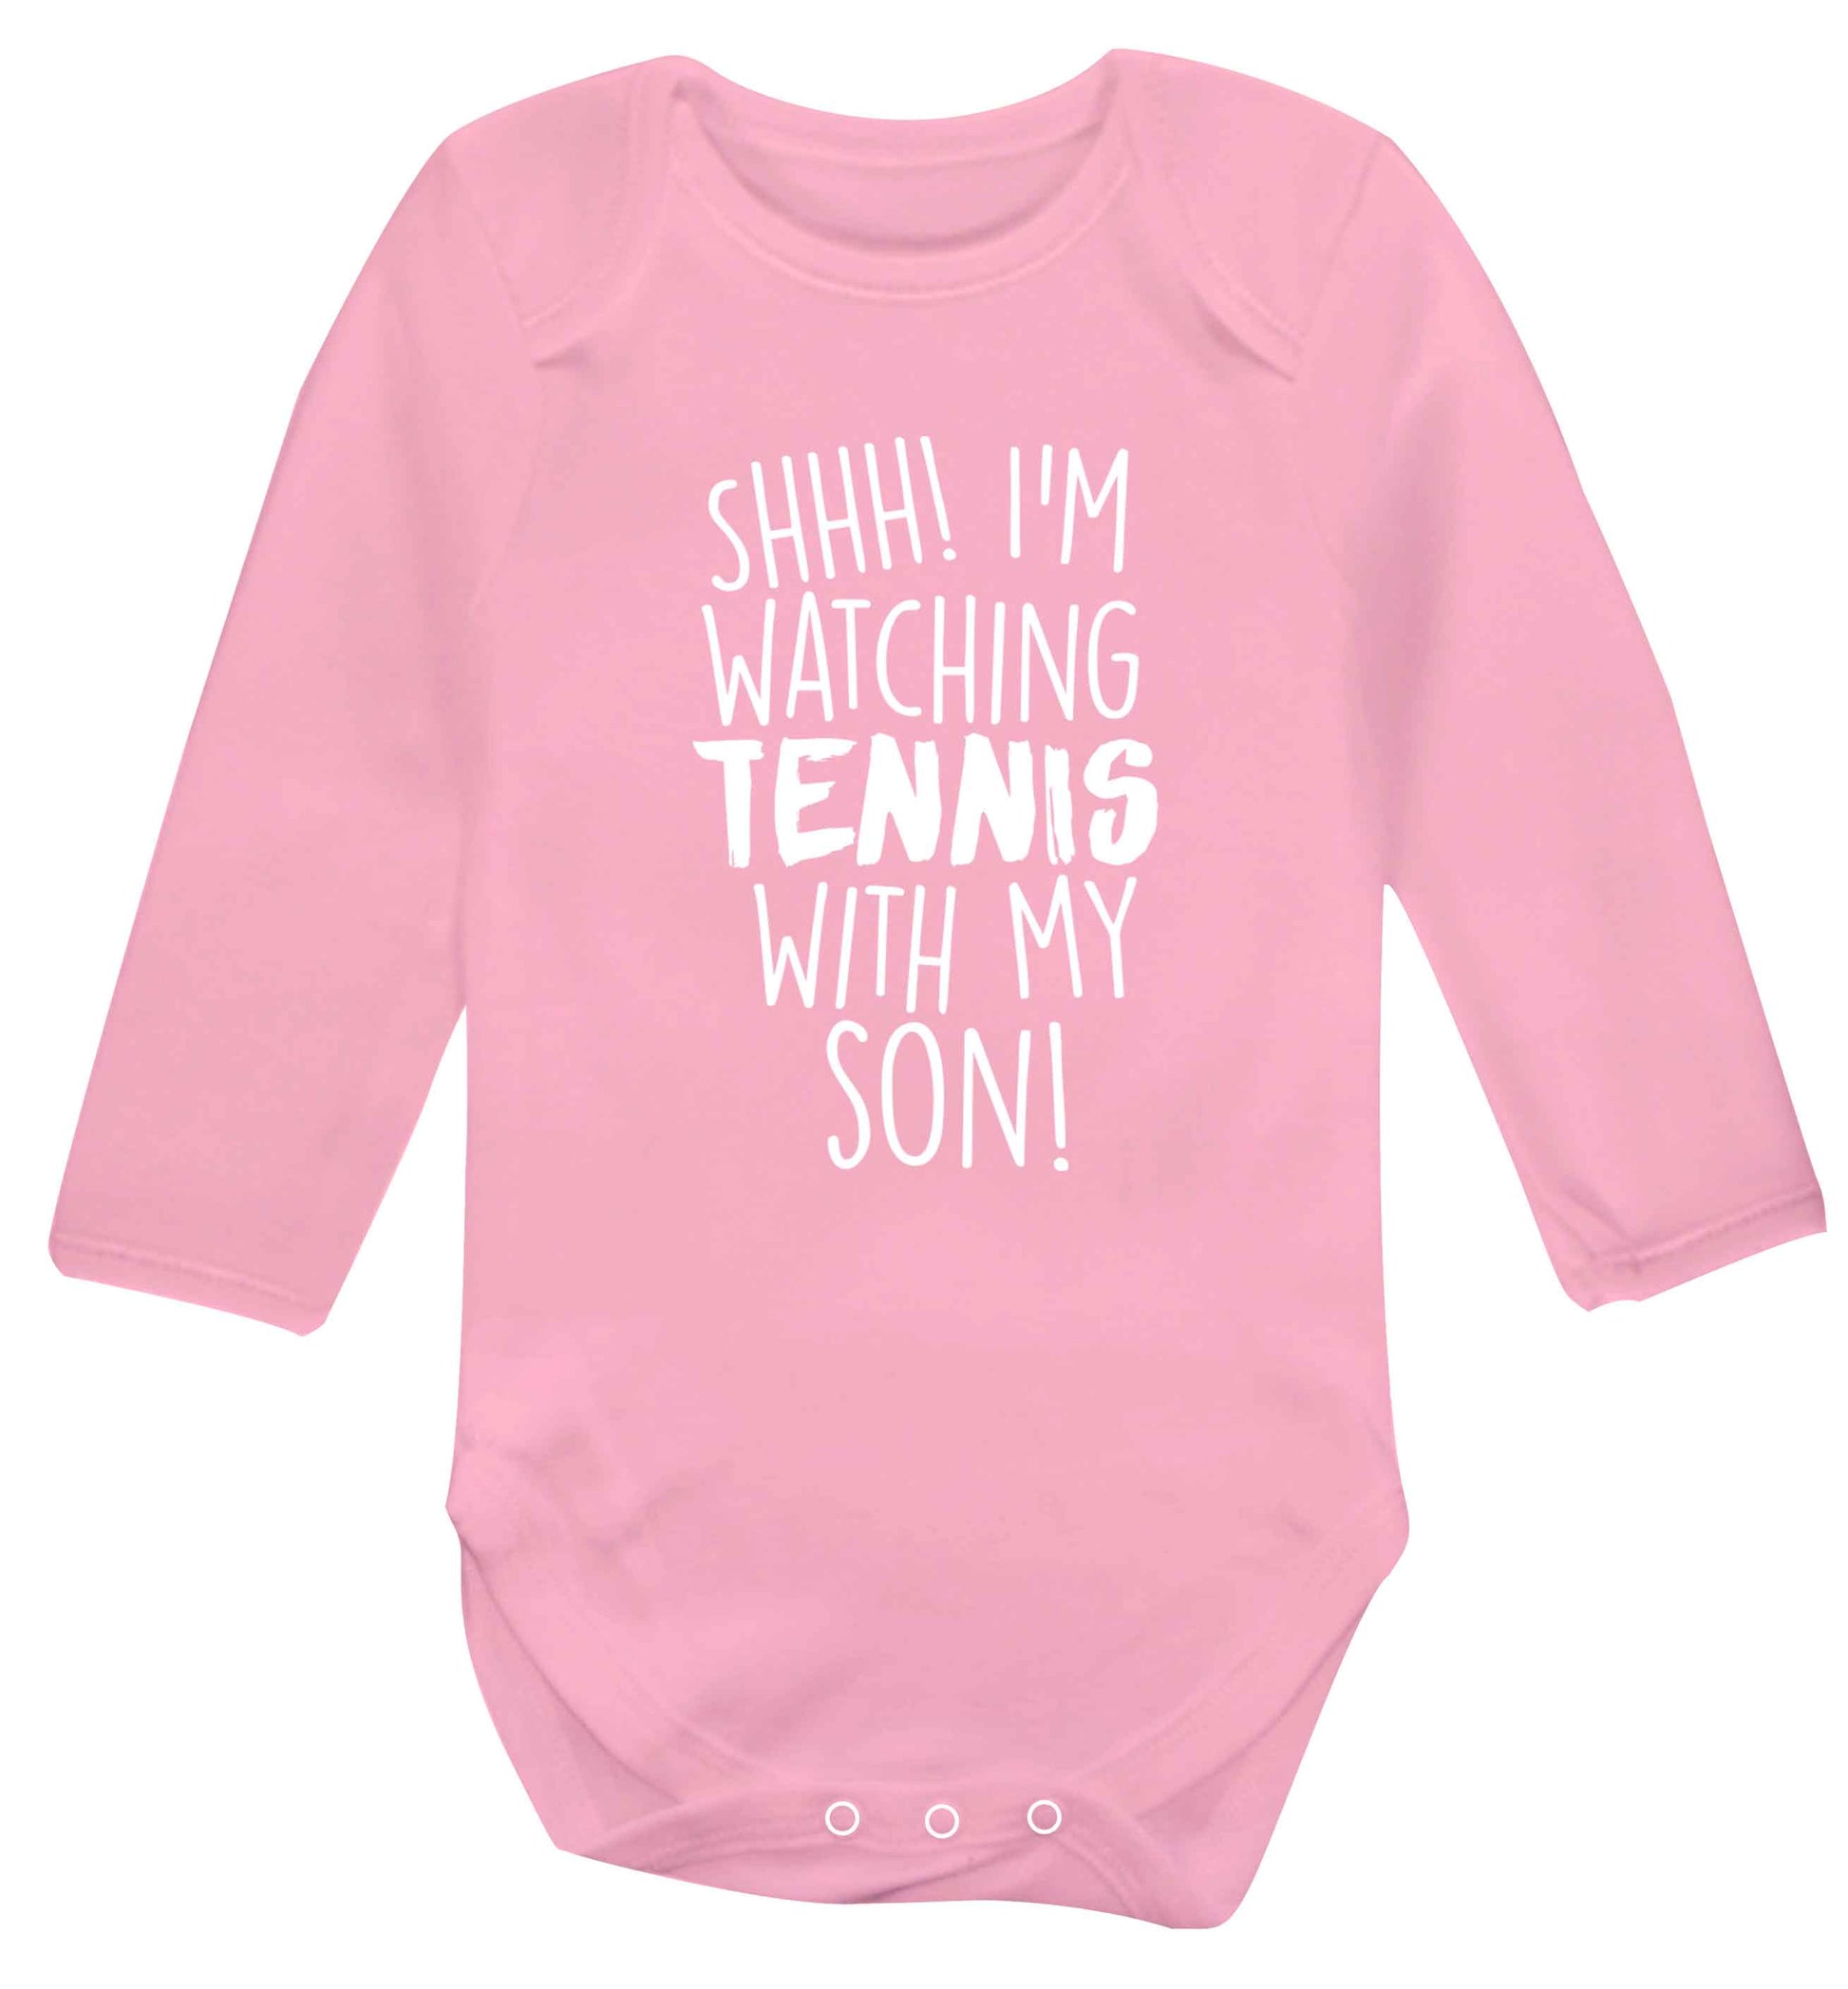 Shh! I'm watching tennis with my son! Baby Vest long sleeved pale pink 6-12 months